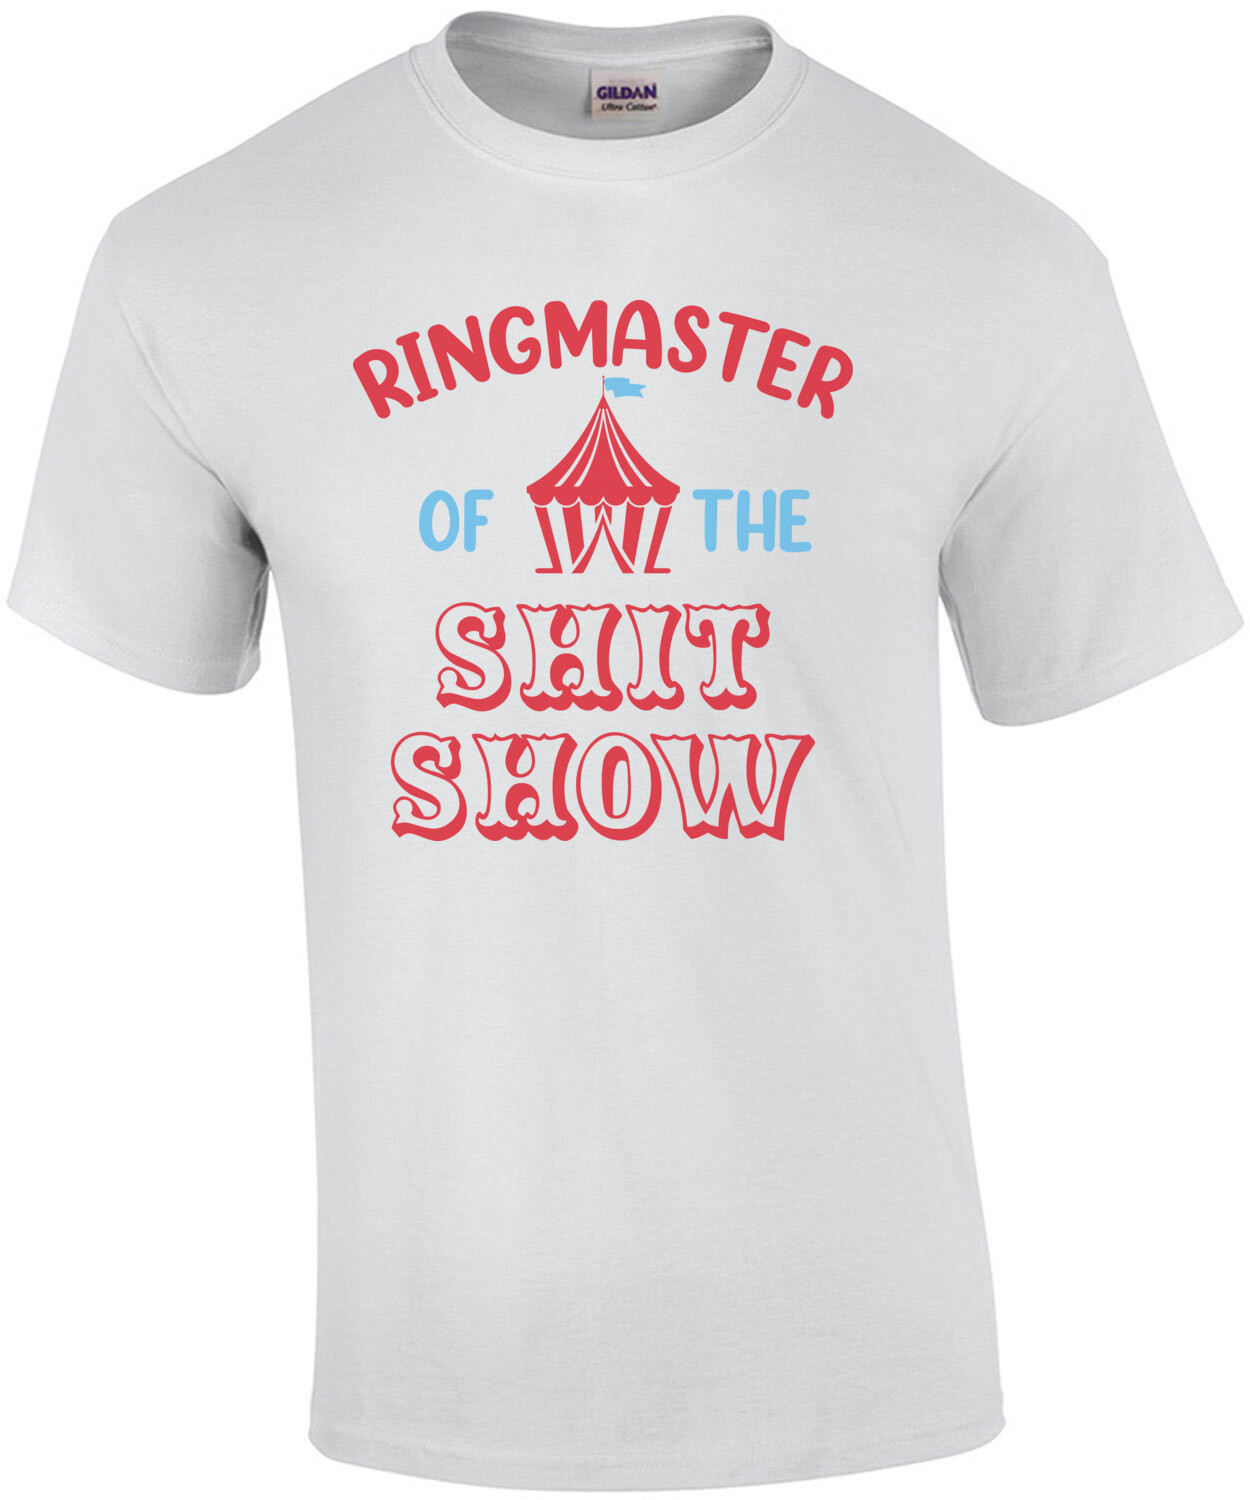 Ringmaster of the shit show - funny t-shirt